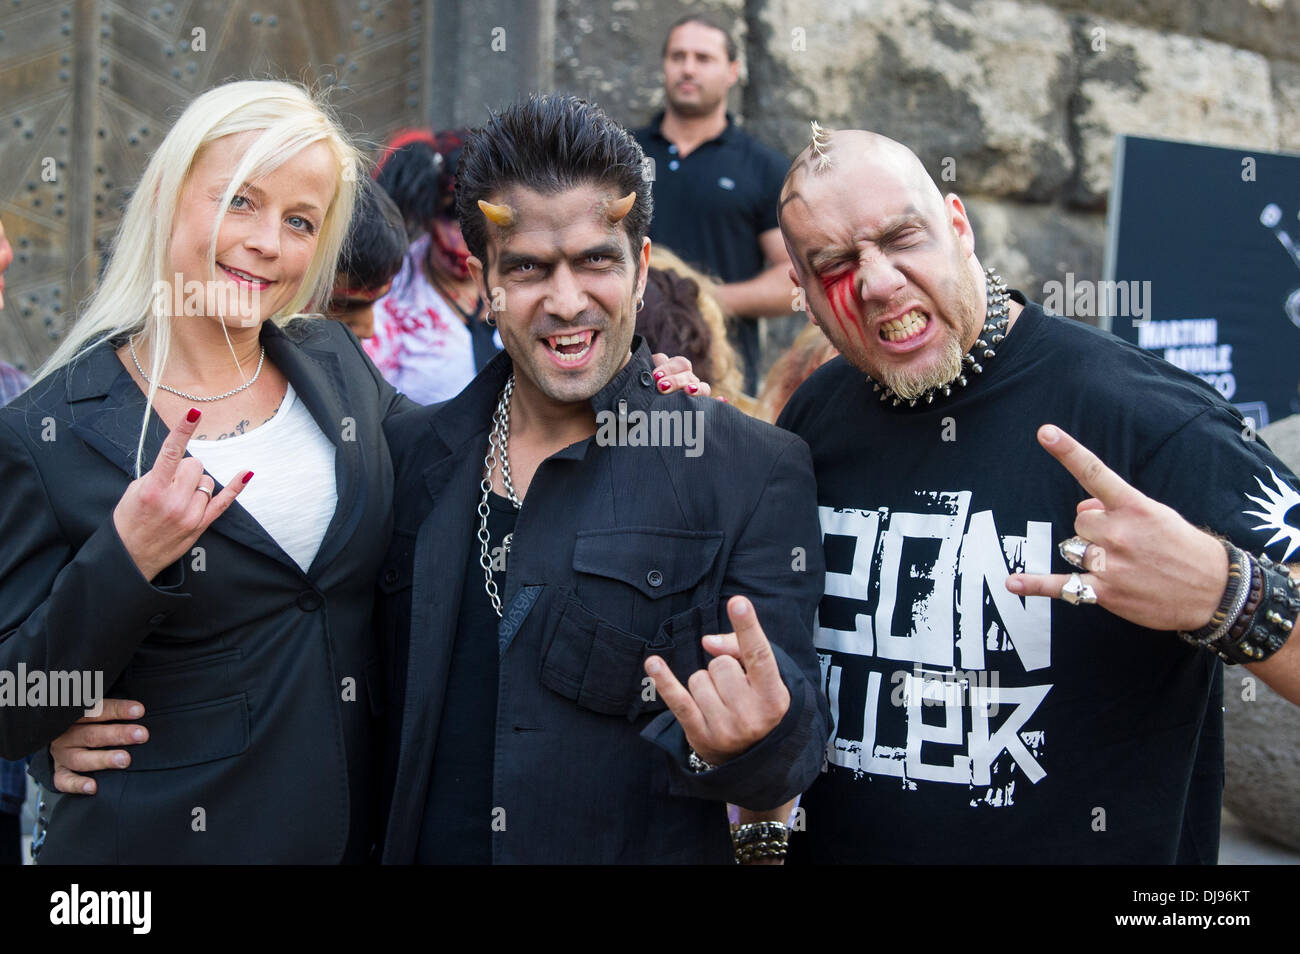 Marc Terenzi at the Hannover premiere of 'Terenzi Horror Nights' at Wasserturm. Hannover, Germany - 14.06.2012 Stock Photo